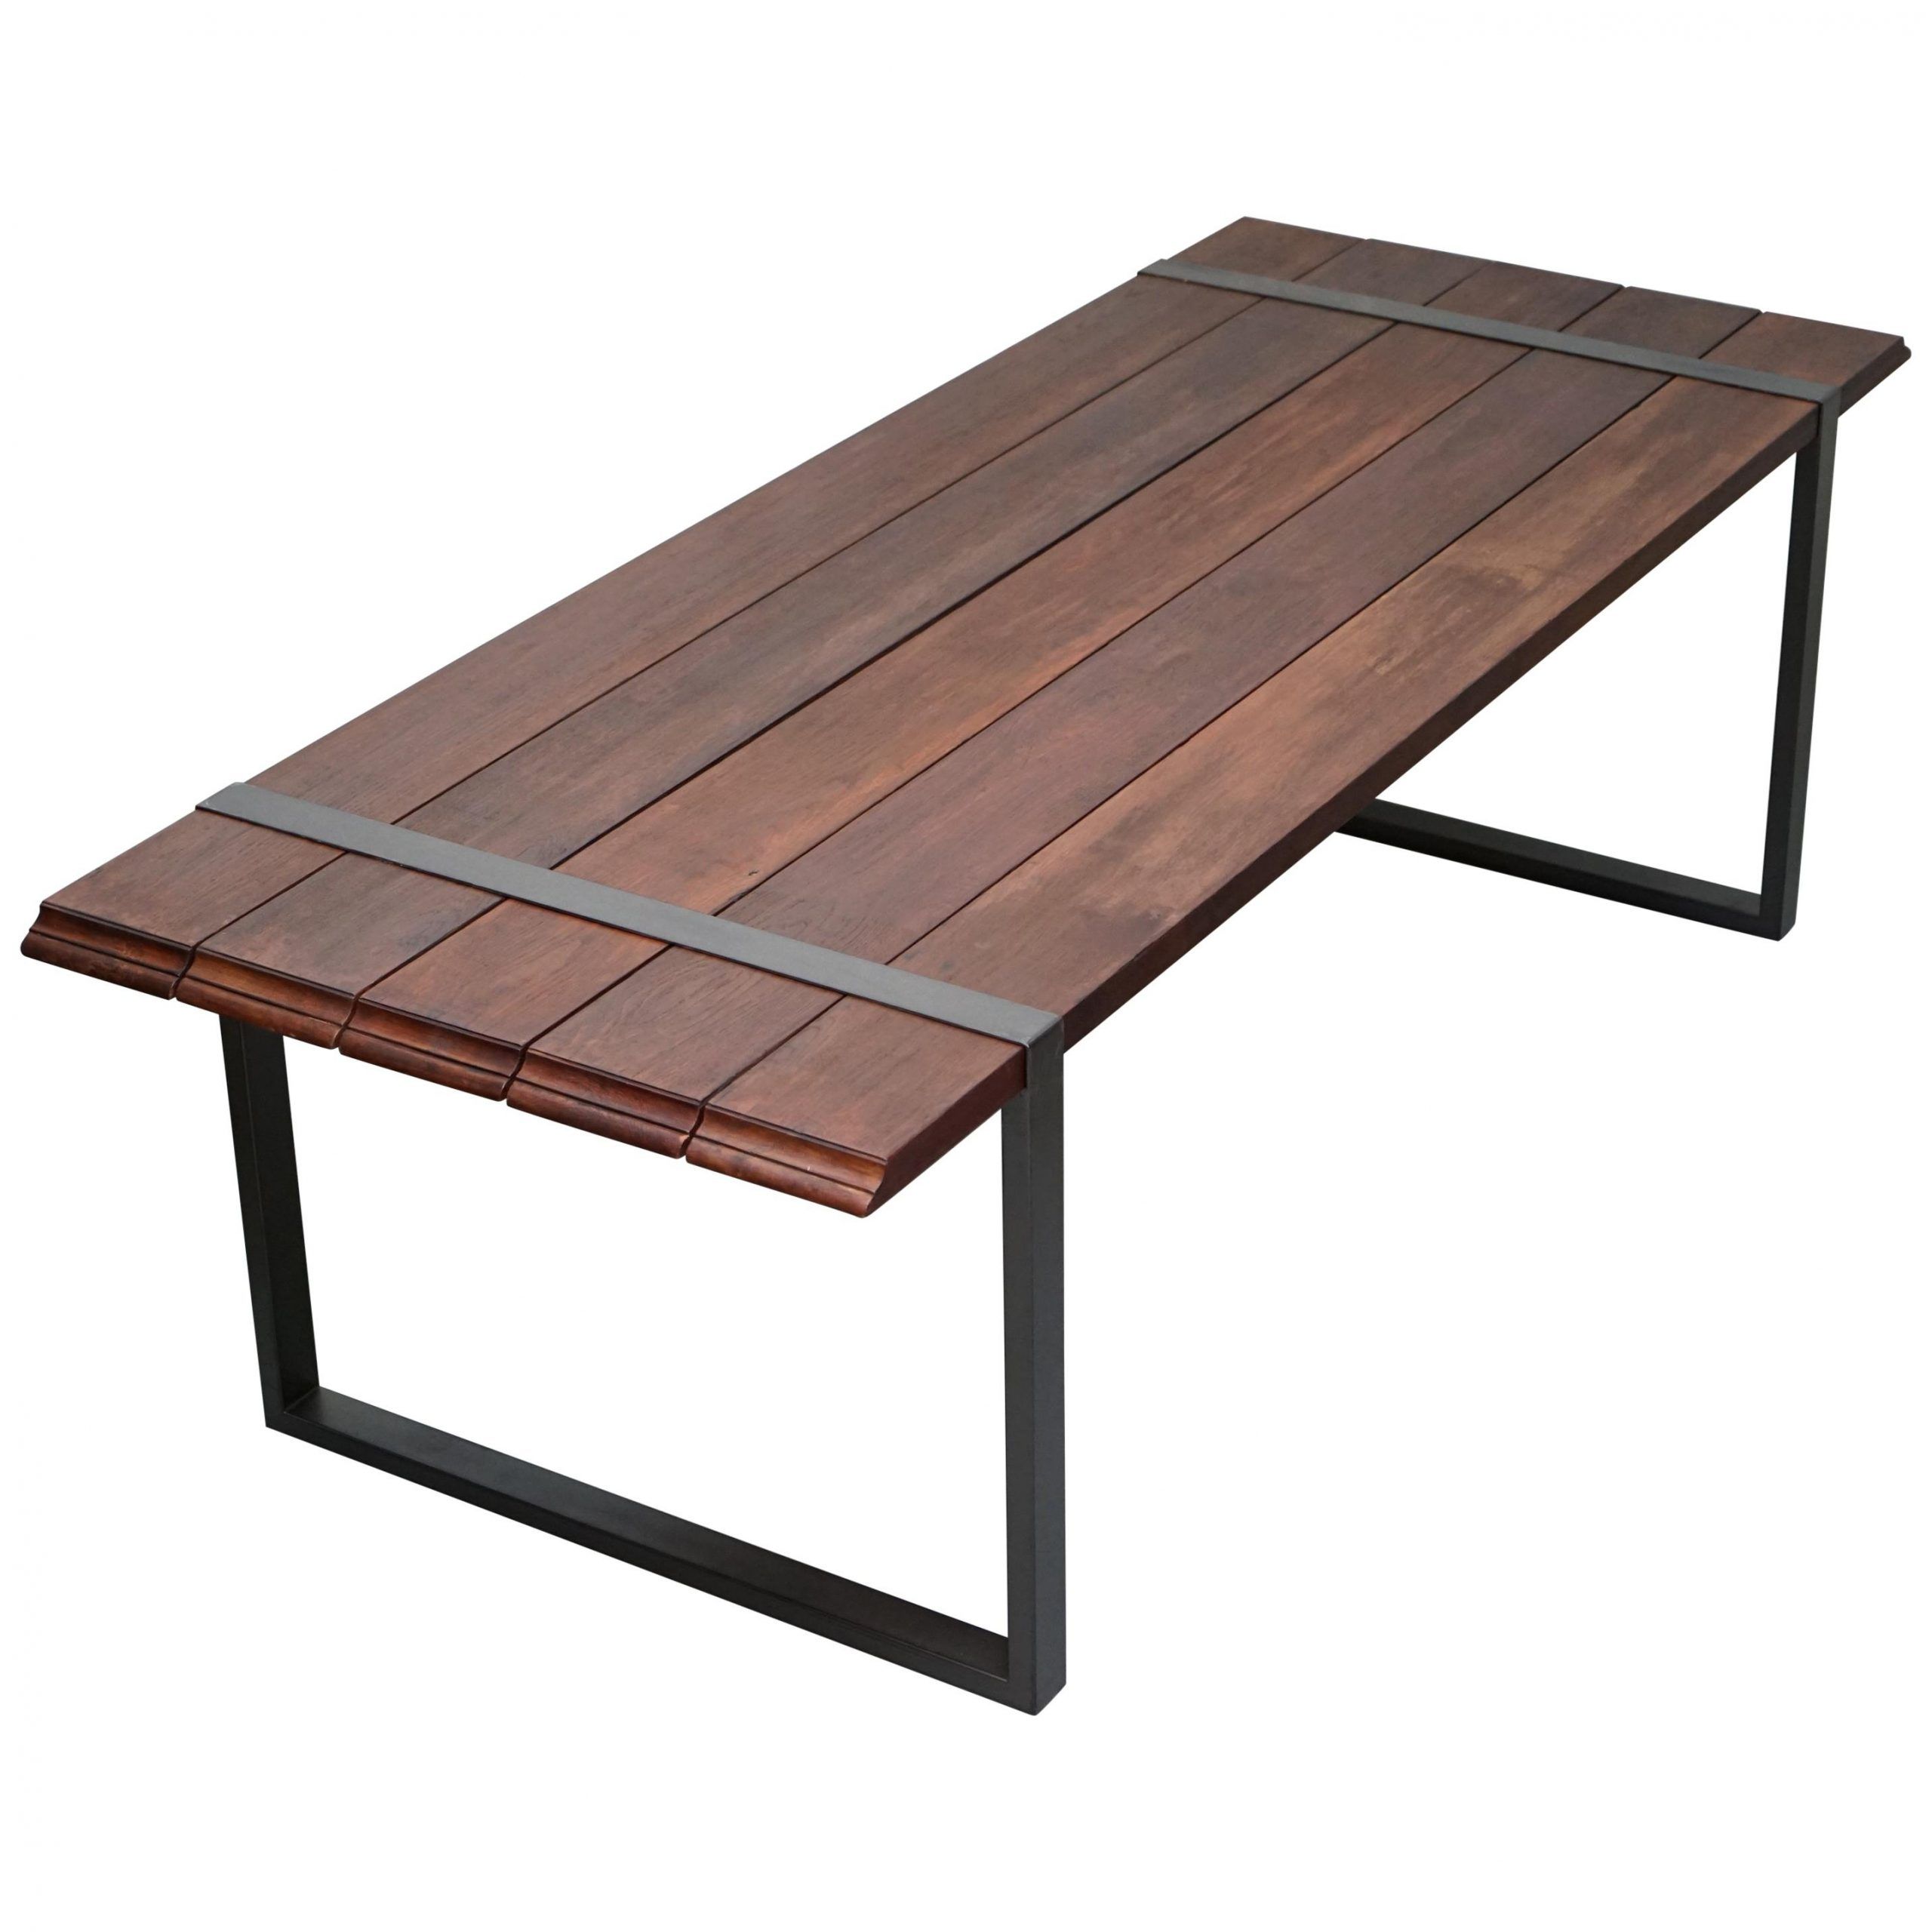 Preferred Garth Roberts Raw Dining Table Zanotta 7090 Adjustable Planks & Design For James Adjustables Height Extending Dining Tables (View 1 of 25)